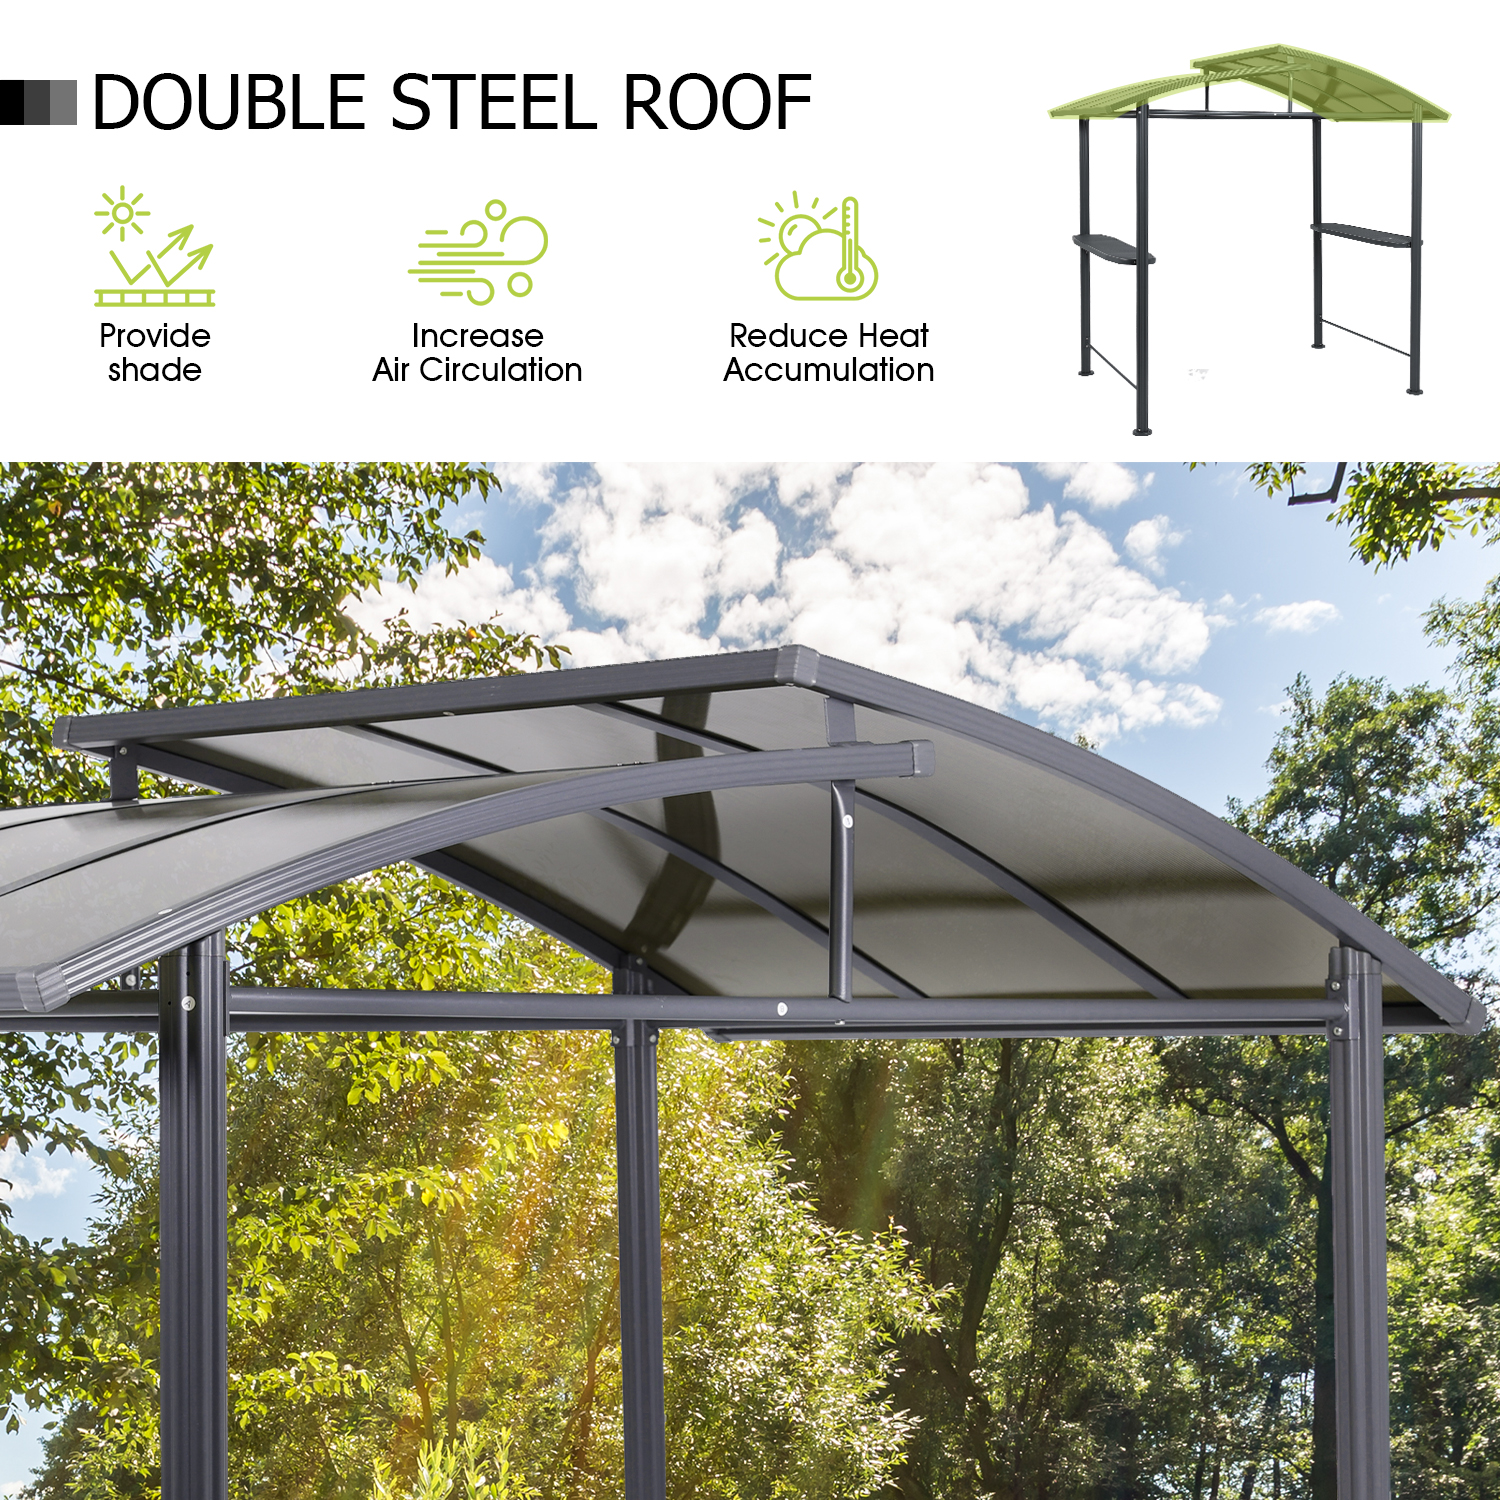 Aoodor 8 x 5 ft. BBQ Grill Gazebo Shelter, Gray Steel Frame with Side Shelves,  for Outdoor, Patio, Backyard - image 5 of 7